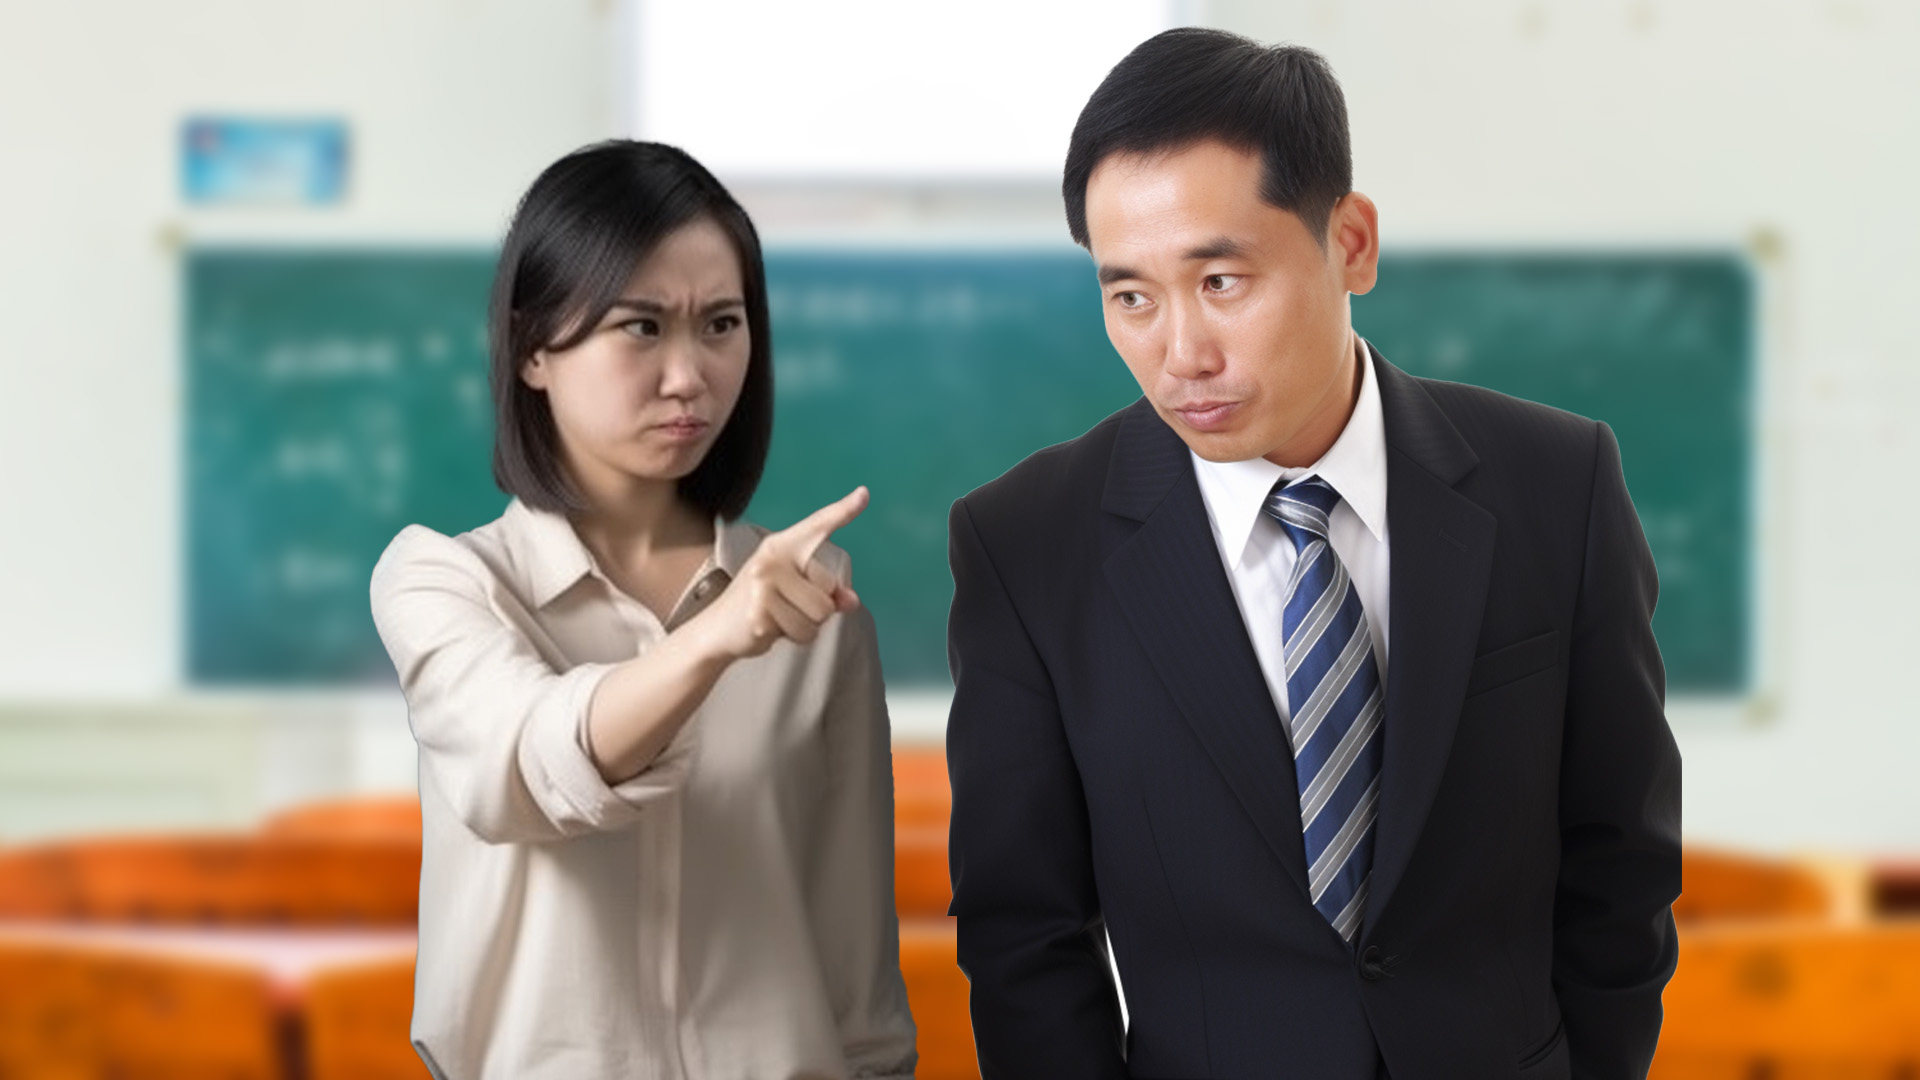 Chinese education authorities are investigating a teacher who removed a father from a parent-teacher chat group after he criticised a homework assignment for his child. Photo: SCMP composite